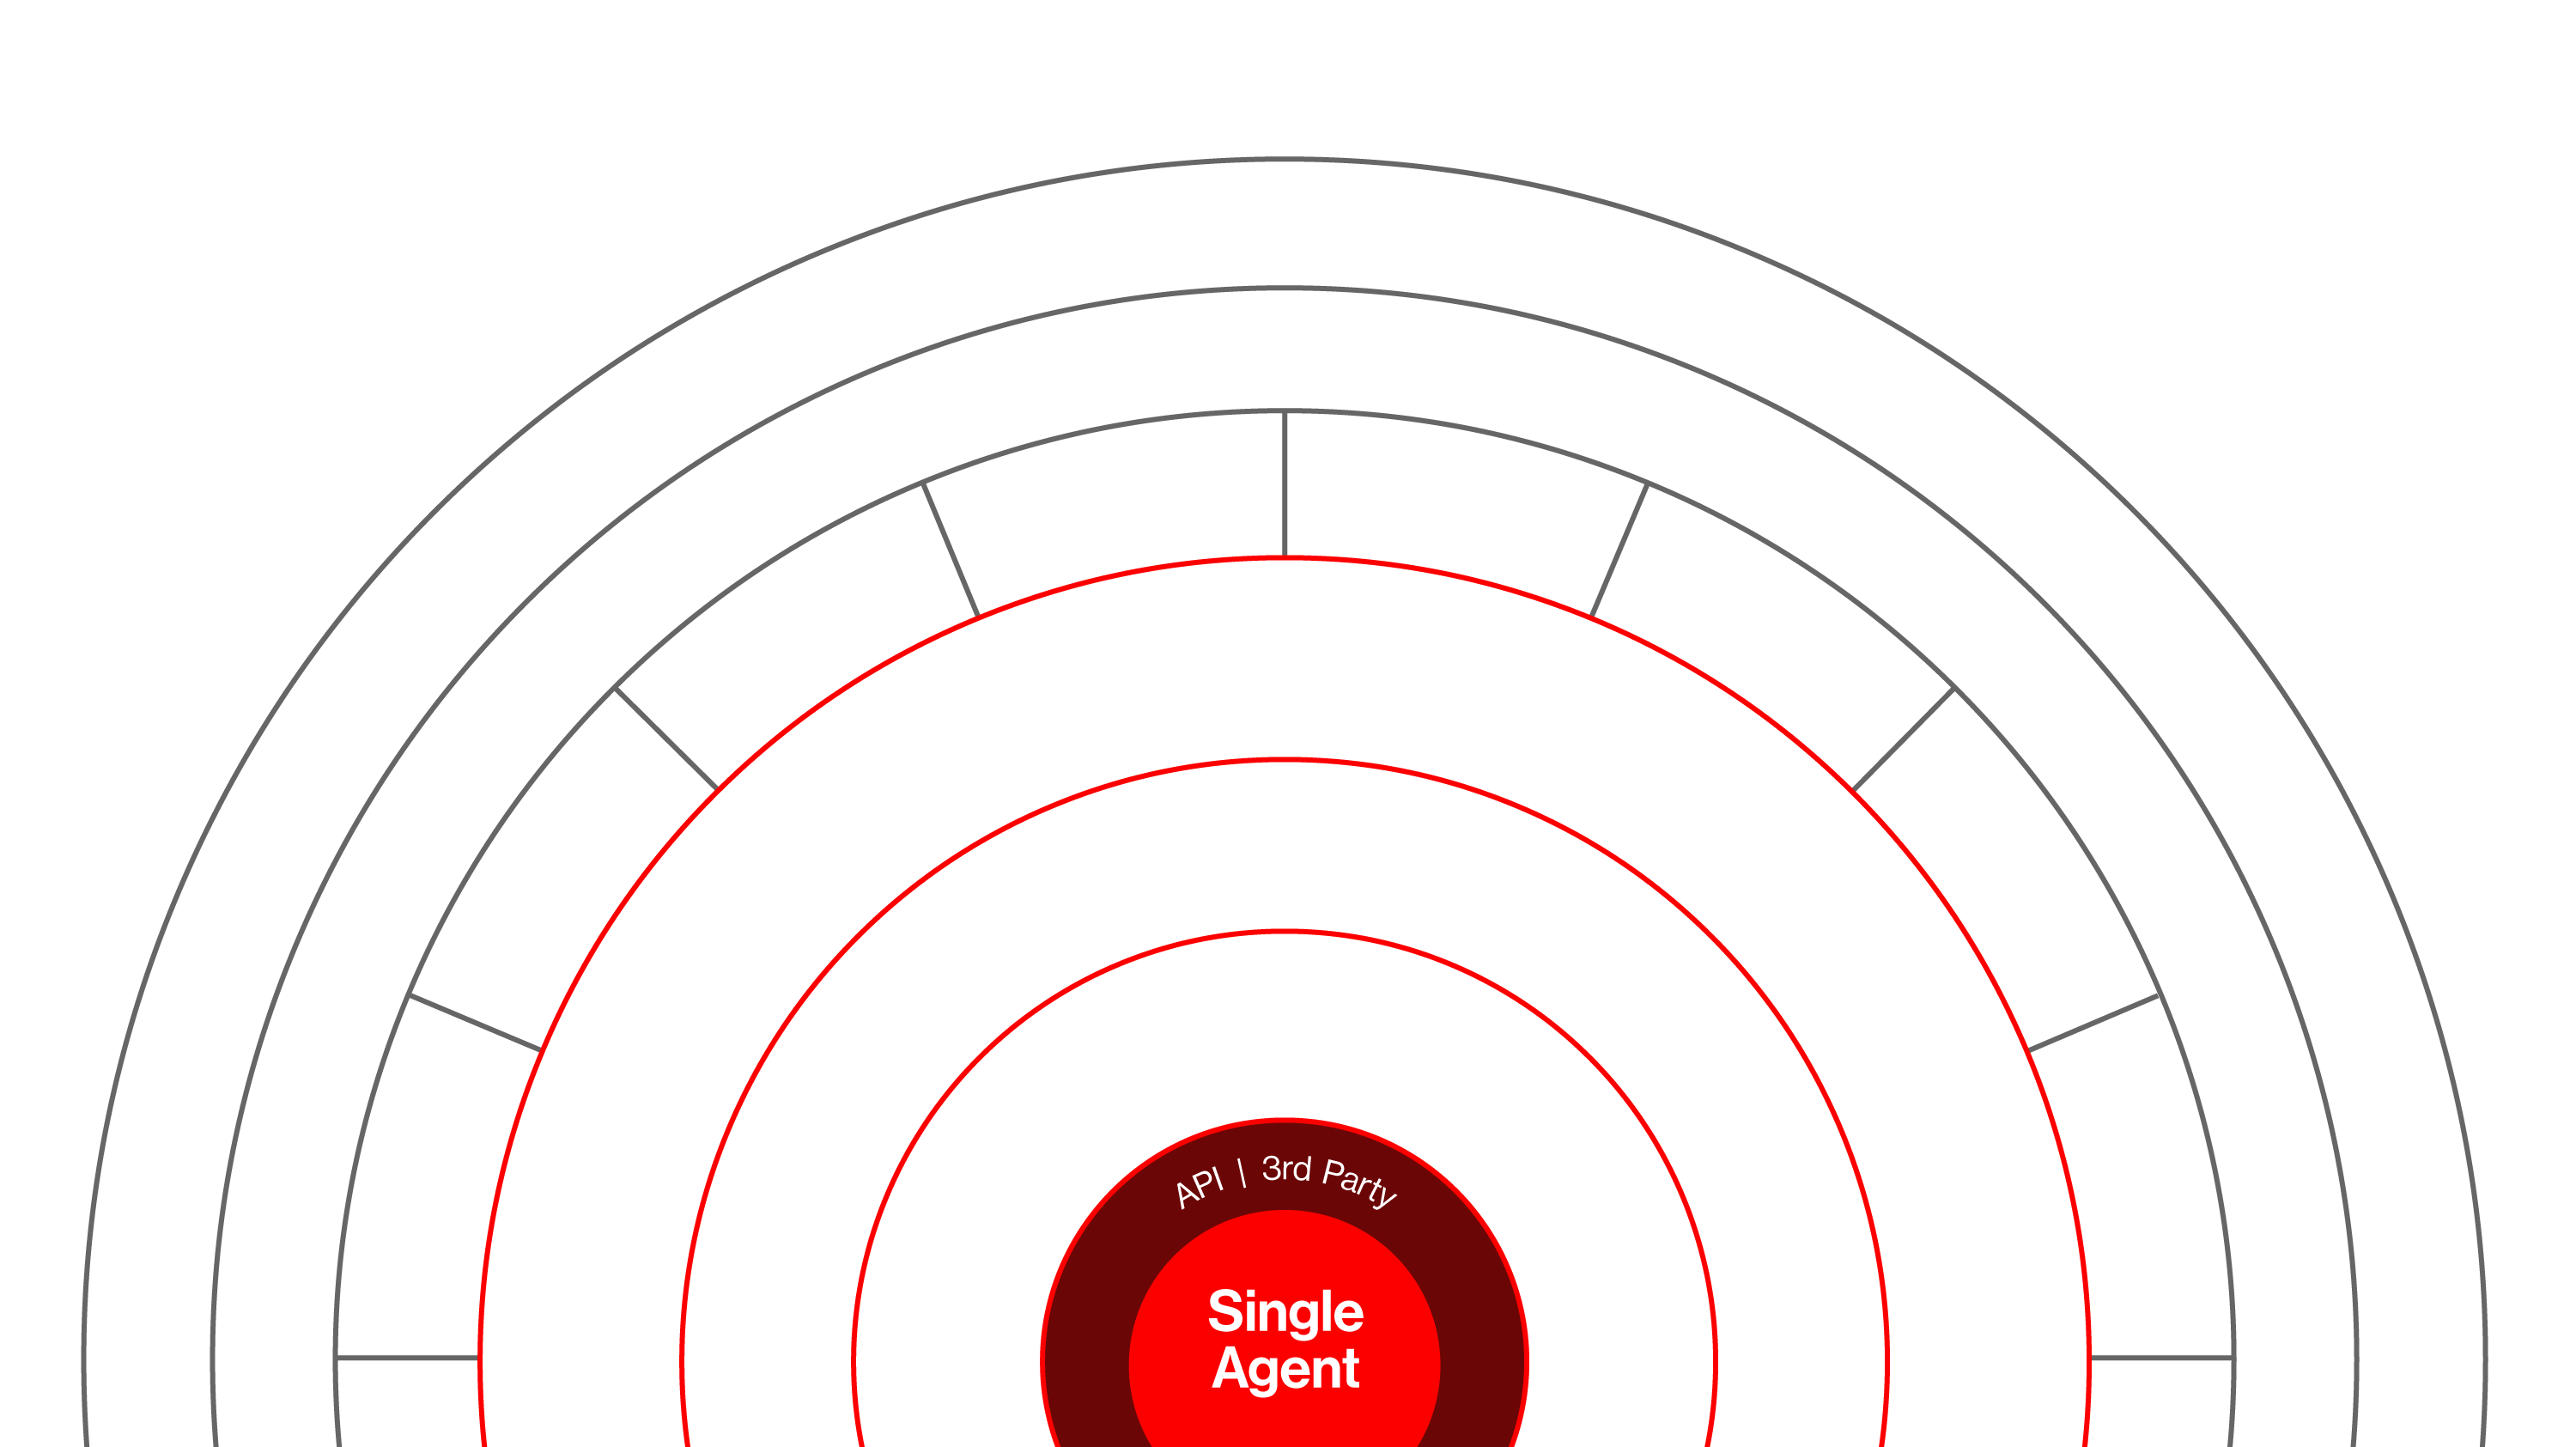 This image shows the CrowdStrike Falcon platform as a series of circles. In the center, there's the 'Single Agent,' surrounded by 'API | 3rd Party.' Moving outward, there are three layers: 'Data Layer' with 'Threat Graph | Intel Graph | Asset Graph,' 'AI Native Layer' with 'Machine Learning | Behavioral AI | Custom LLMs,' and 'Workflow & Development Layer' with 'Foundry | Fusion | Generative Workflow | Marketplace.' The next circle contains platform categories: 'EDR, ITDR, Cloud Security, XDR | NG SIEM, Data Protection, Exposure Management, IT Automation, and Intelligence.' The second-to-last circle includes 'CrowdStrike Services, MDR/CDR, and Managed Threat Hunting.' The outermost circle features 'Charlotte AI,' CrowdStrike's generative AI security analyst.